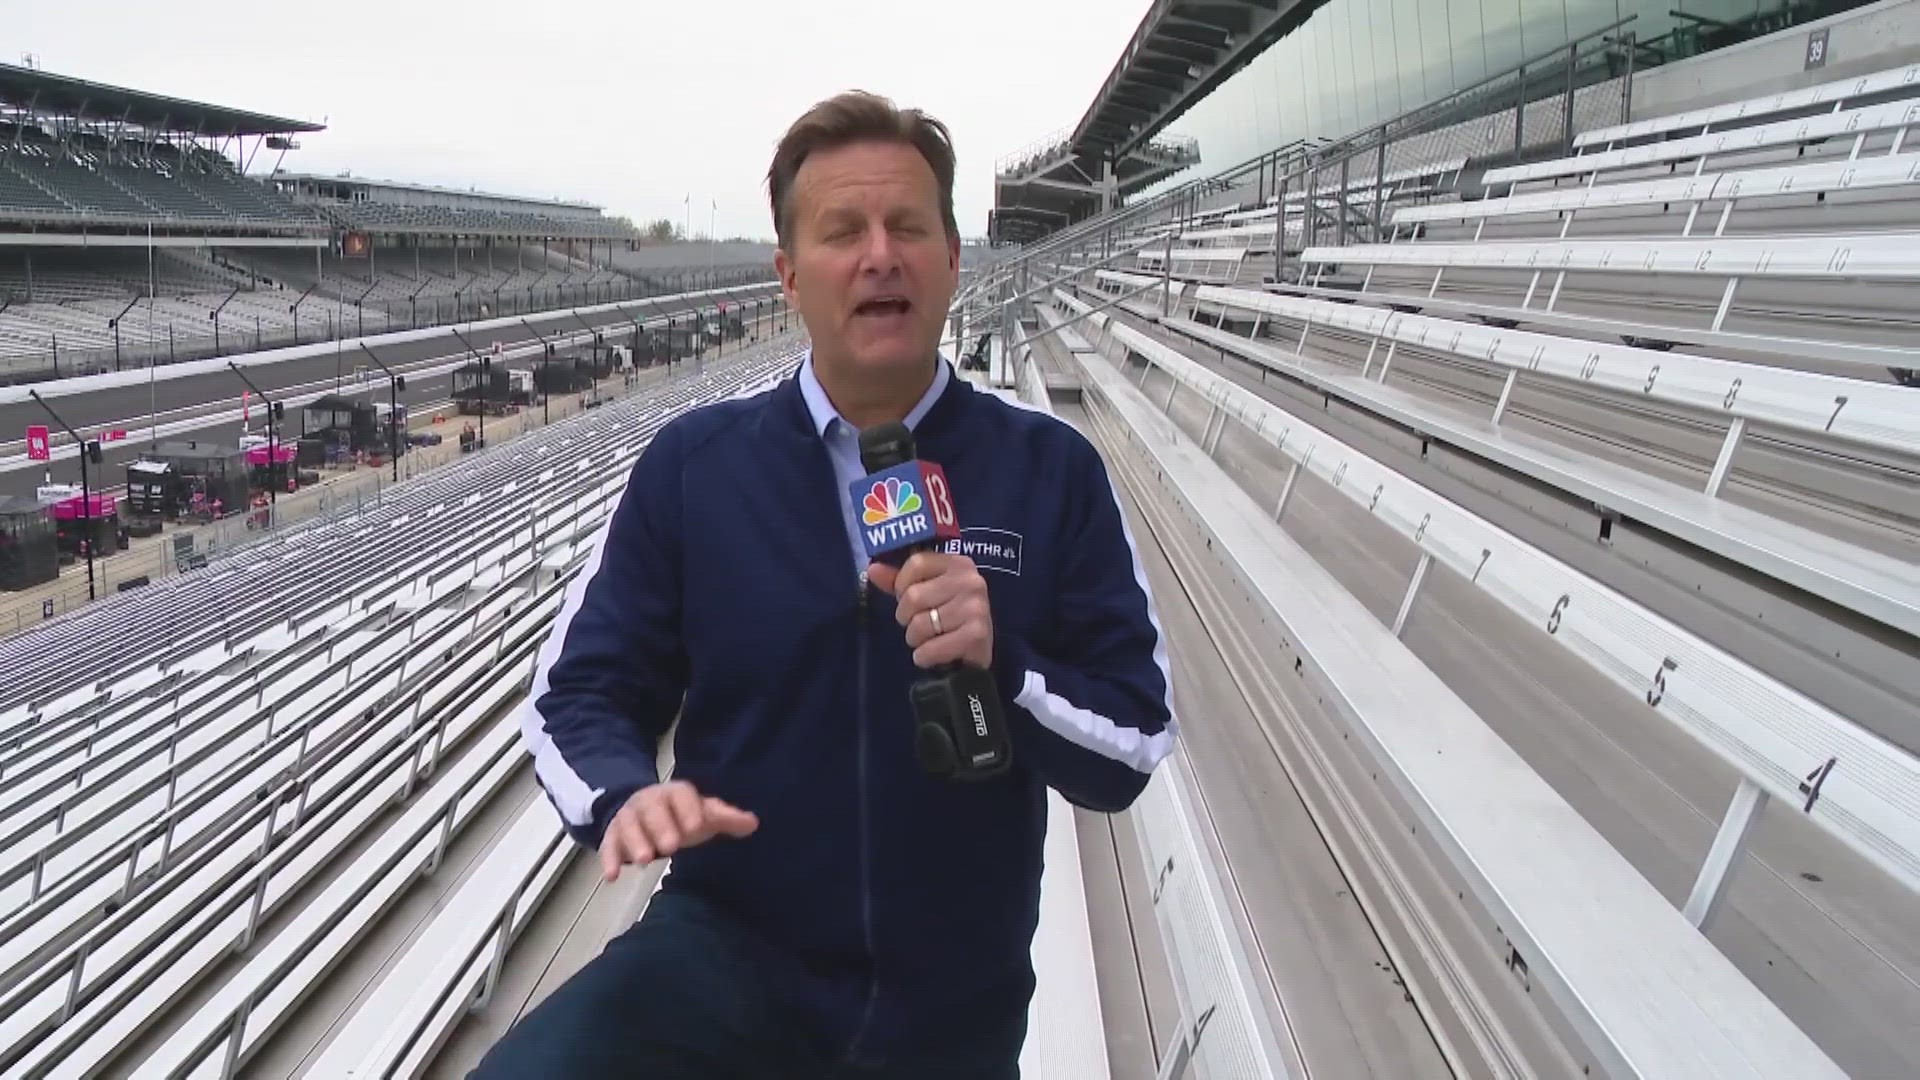 Dave Calabro spends some time off the track with past Indy 500 winners!